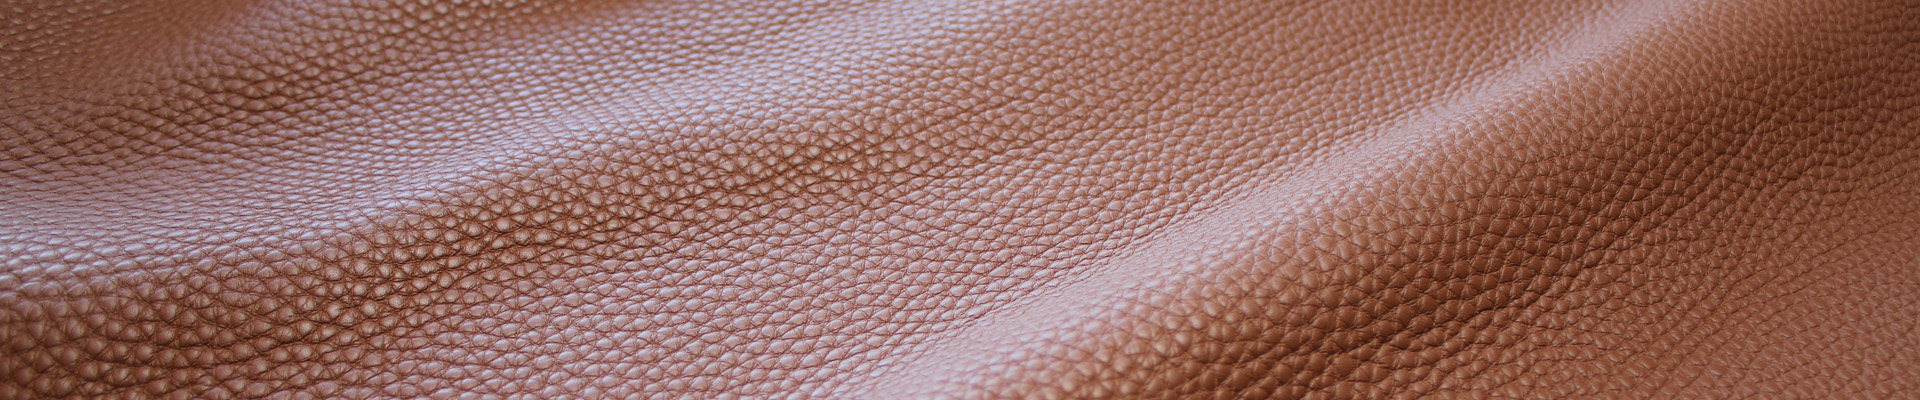 Upholstery leather stock complying with international leather specifications